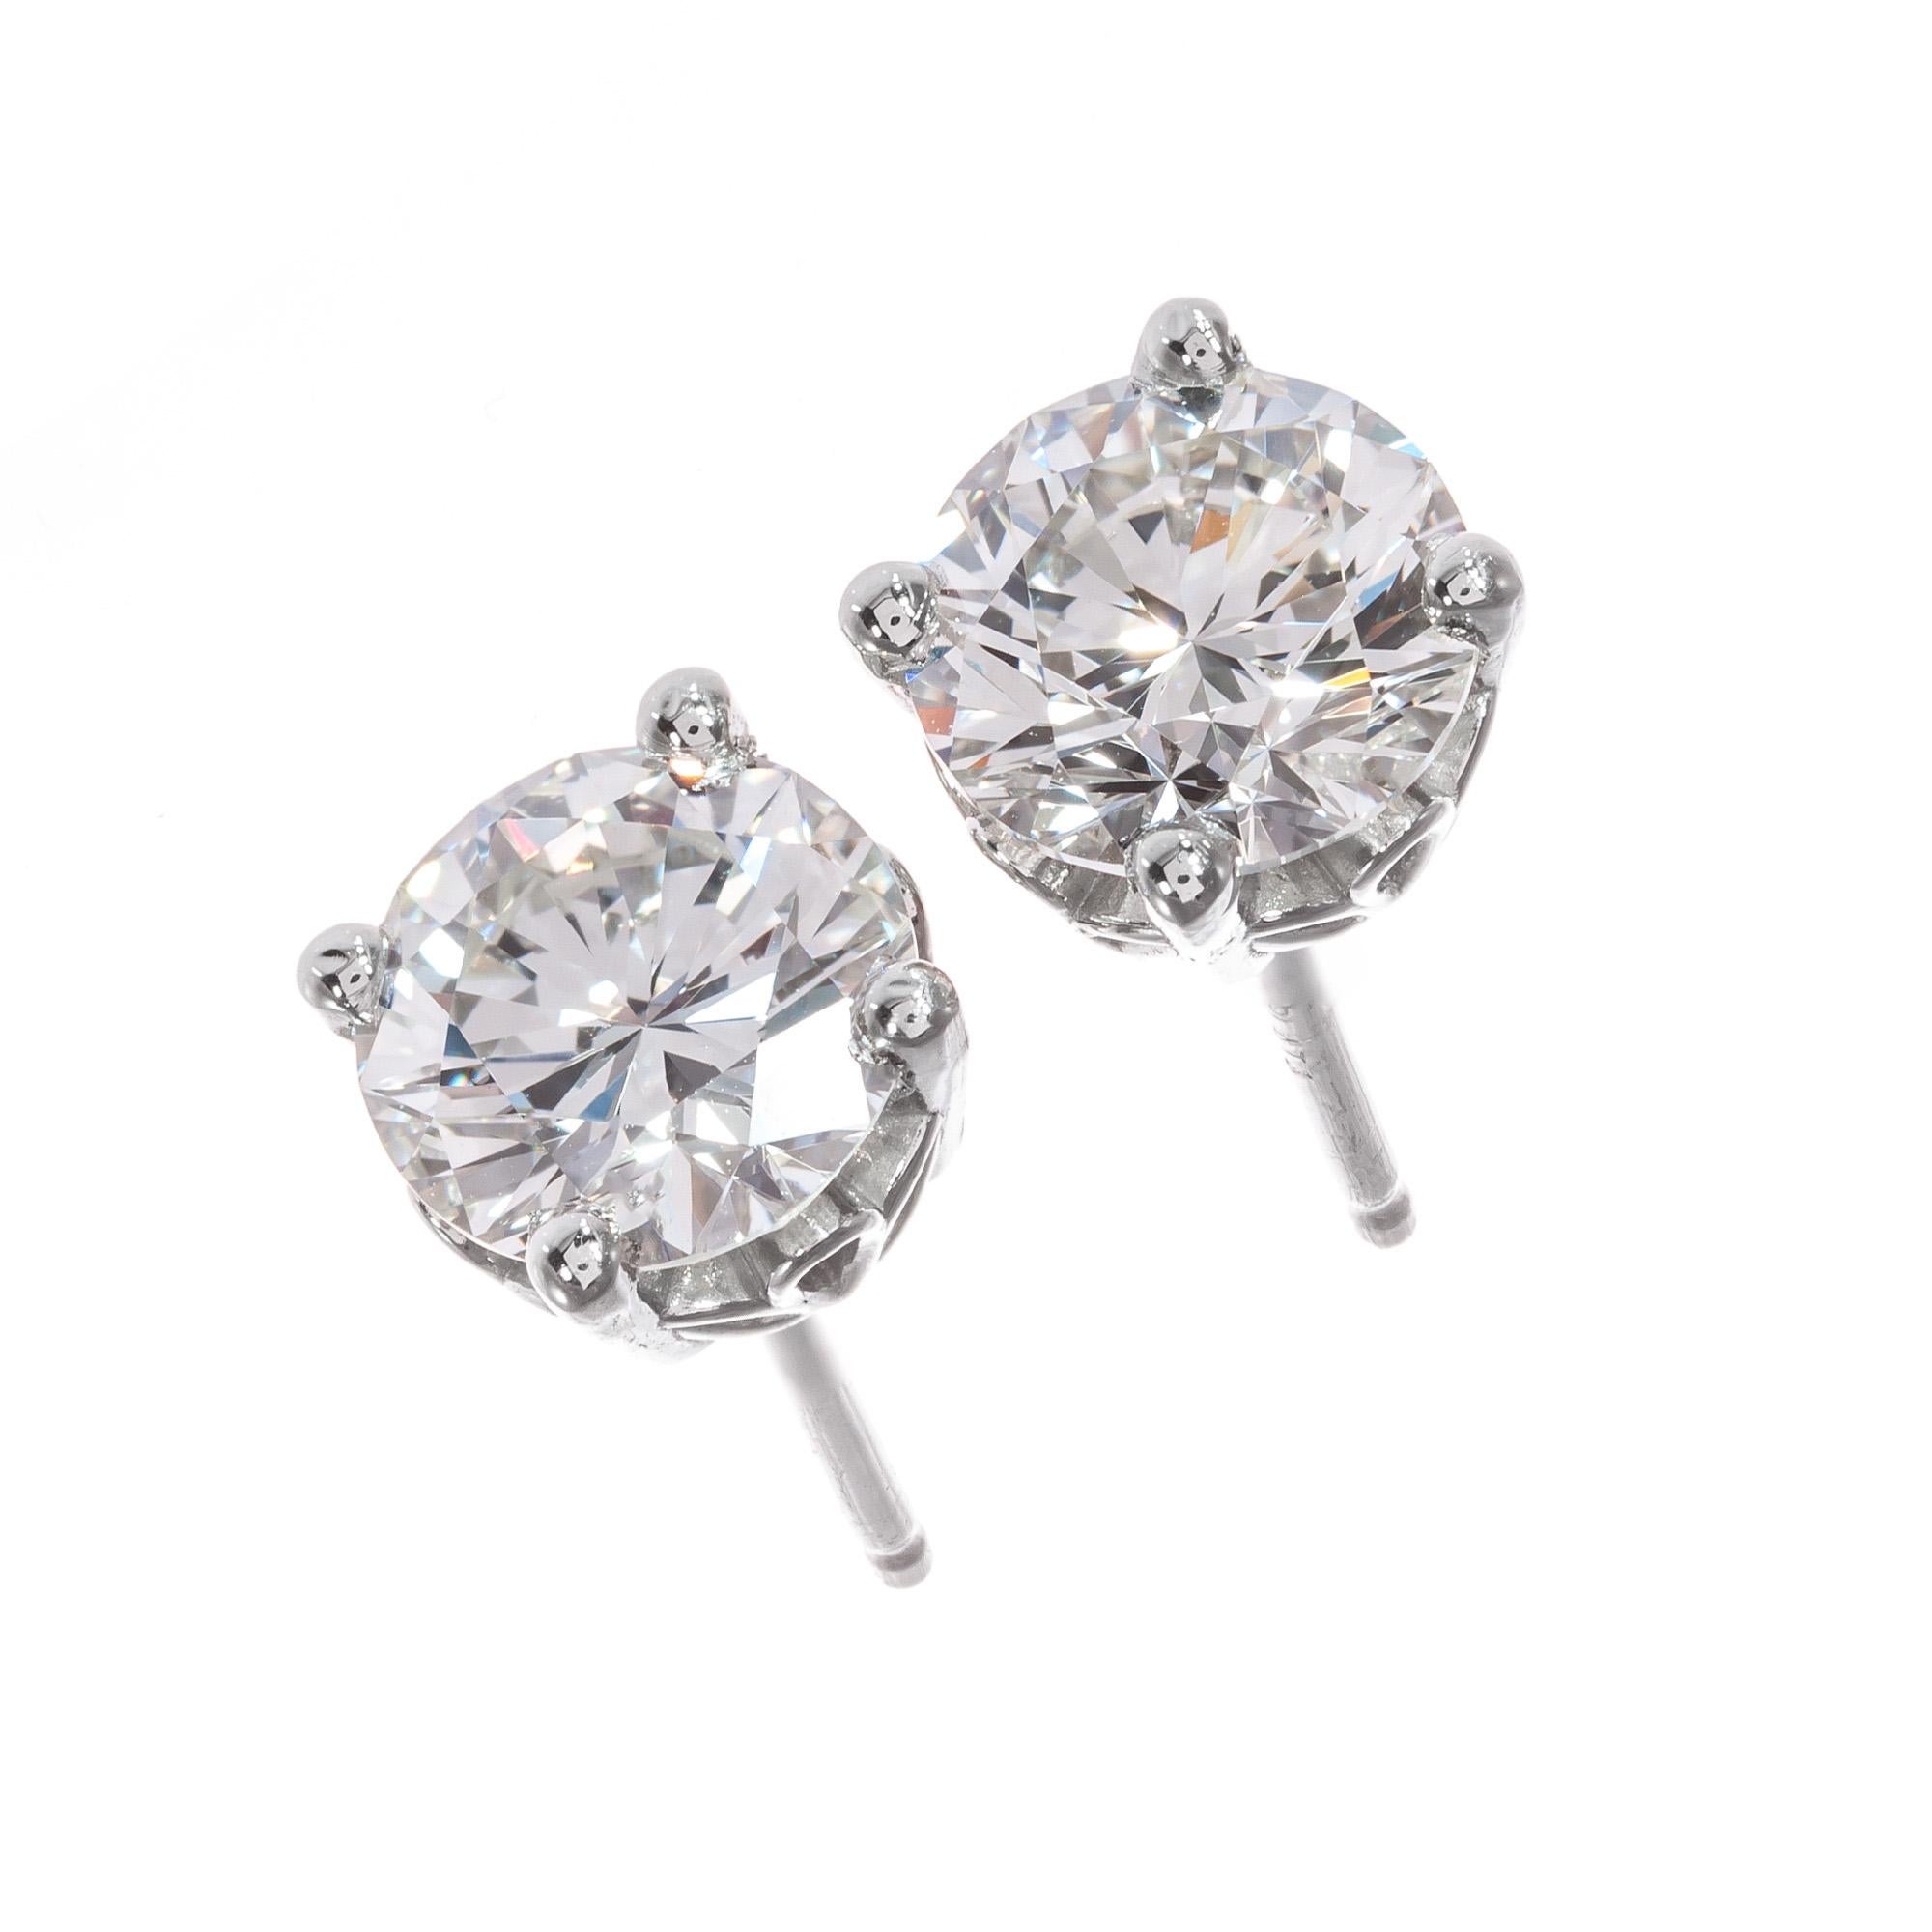 Well-cut bright sparkly diamond stud earrings. s from an estate. GIA certified round brilliant cut diamonds in a simple classic open work basket platinum setting, from the Peter Suchy Workshop. 

1 round brilliant cut J VS diamond, Approximate